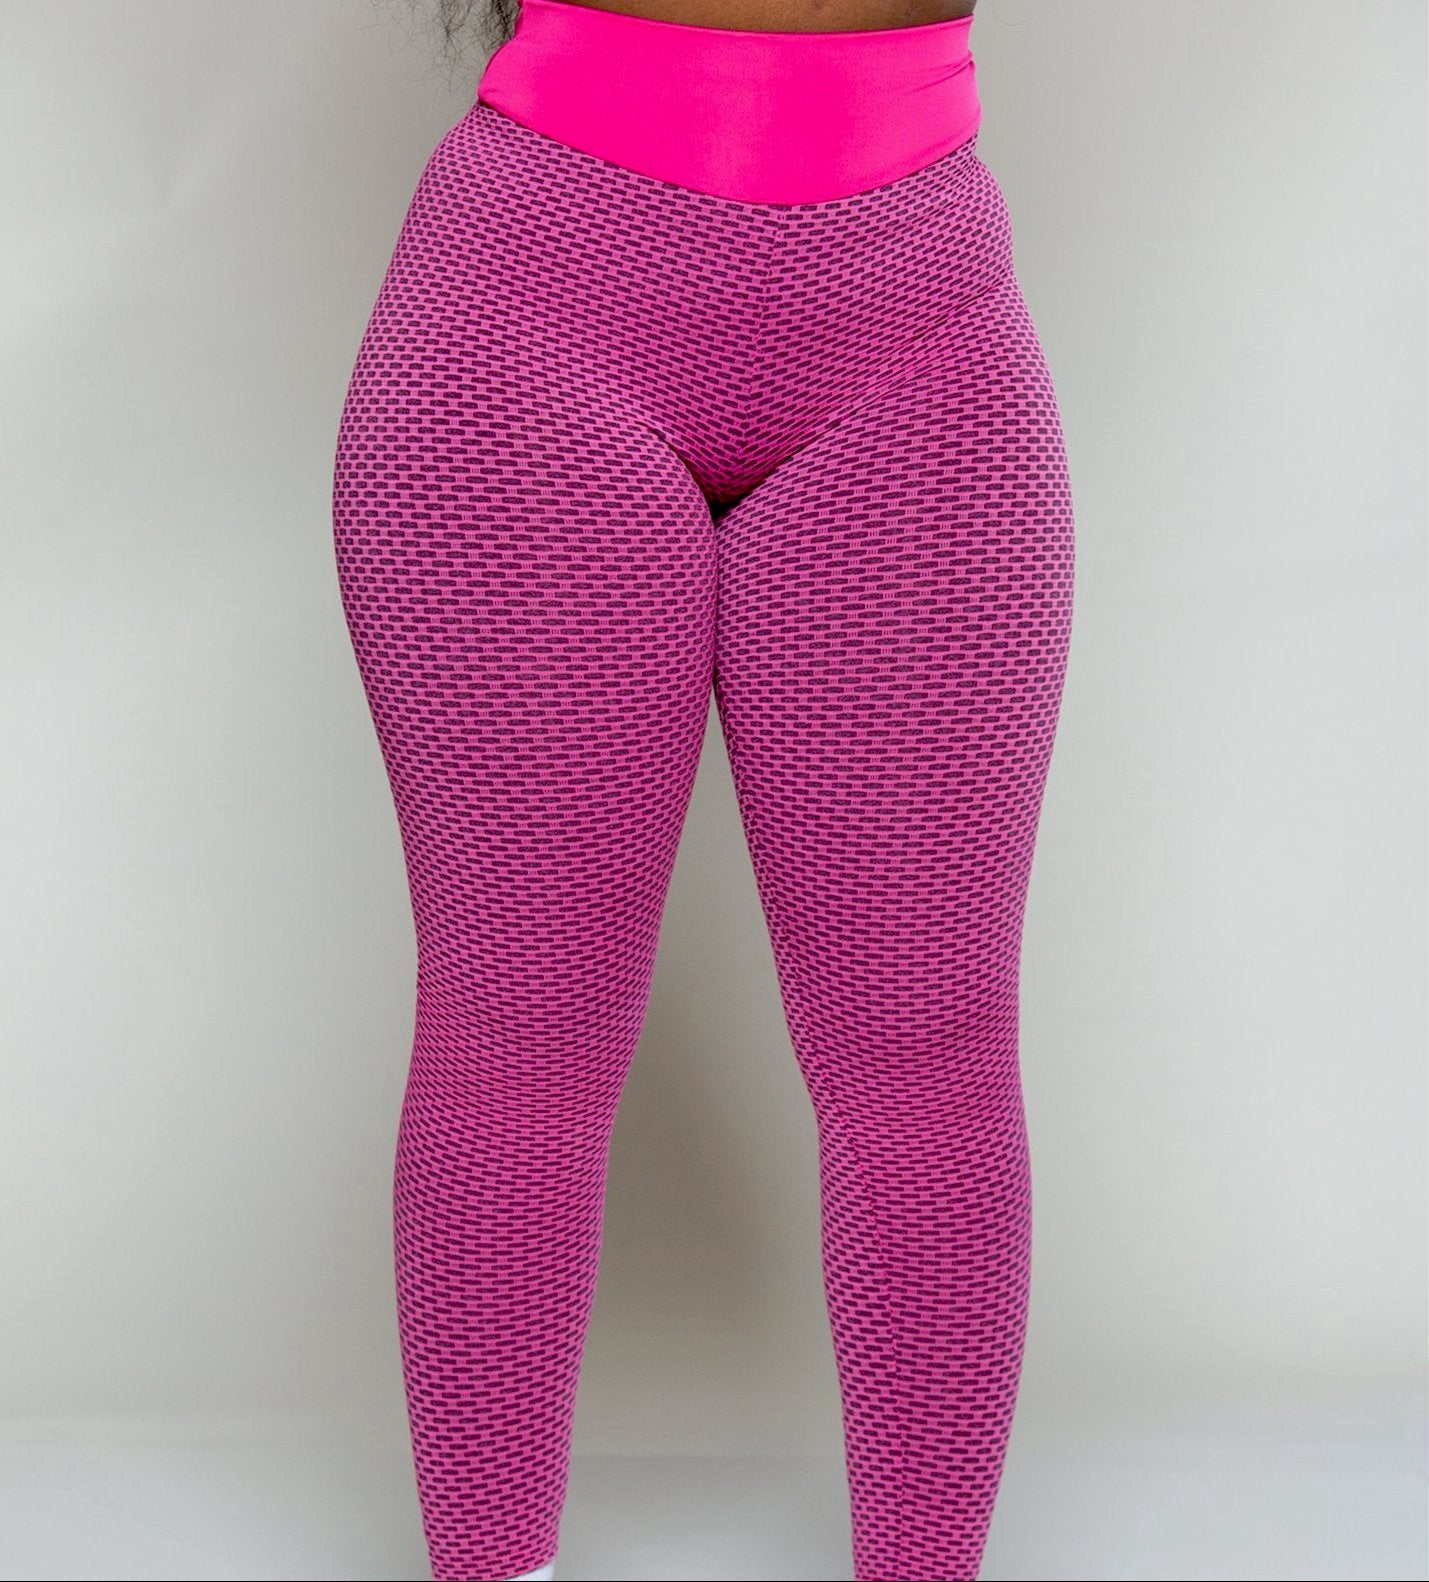 Mad About You - Yoga Leggings for Women